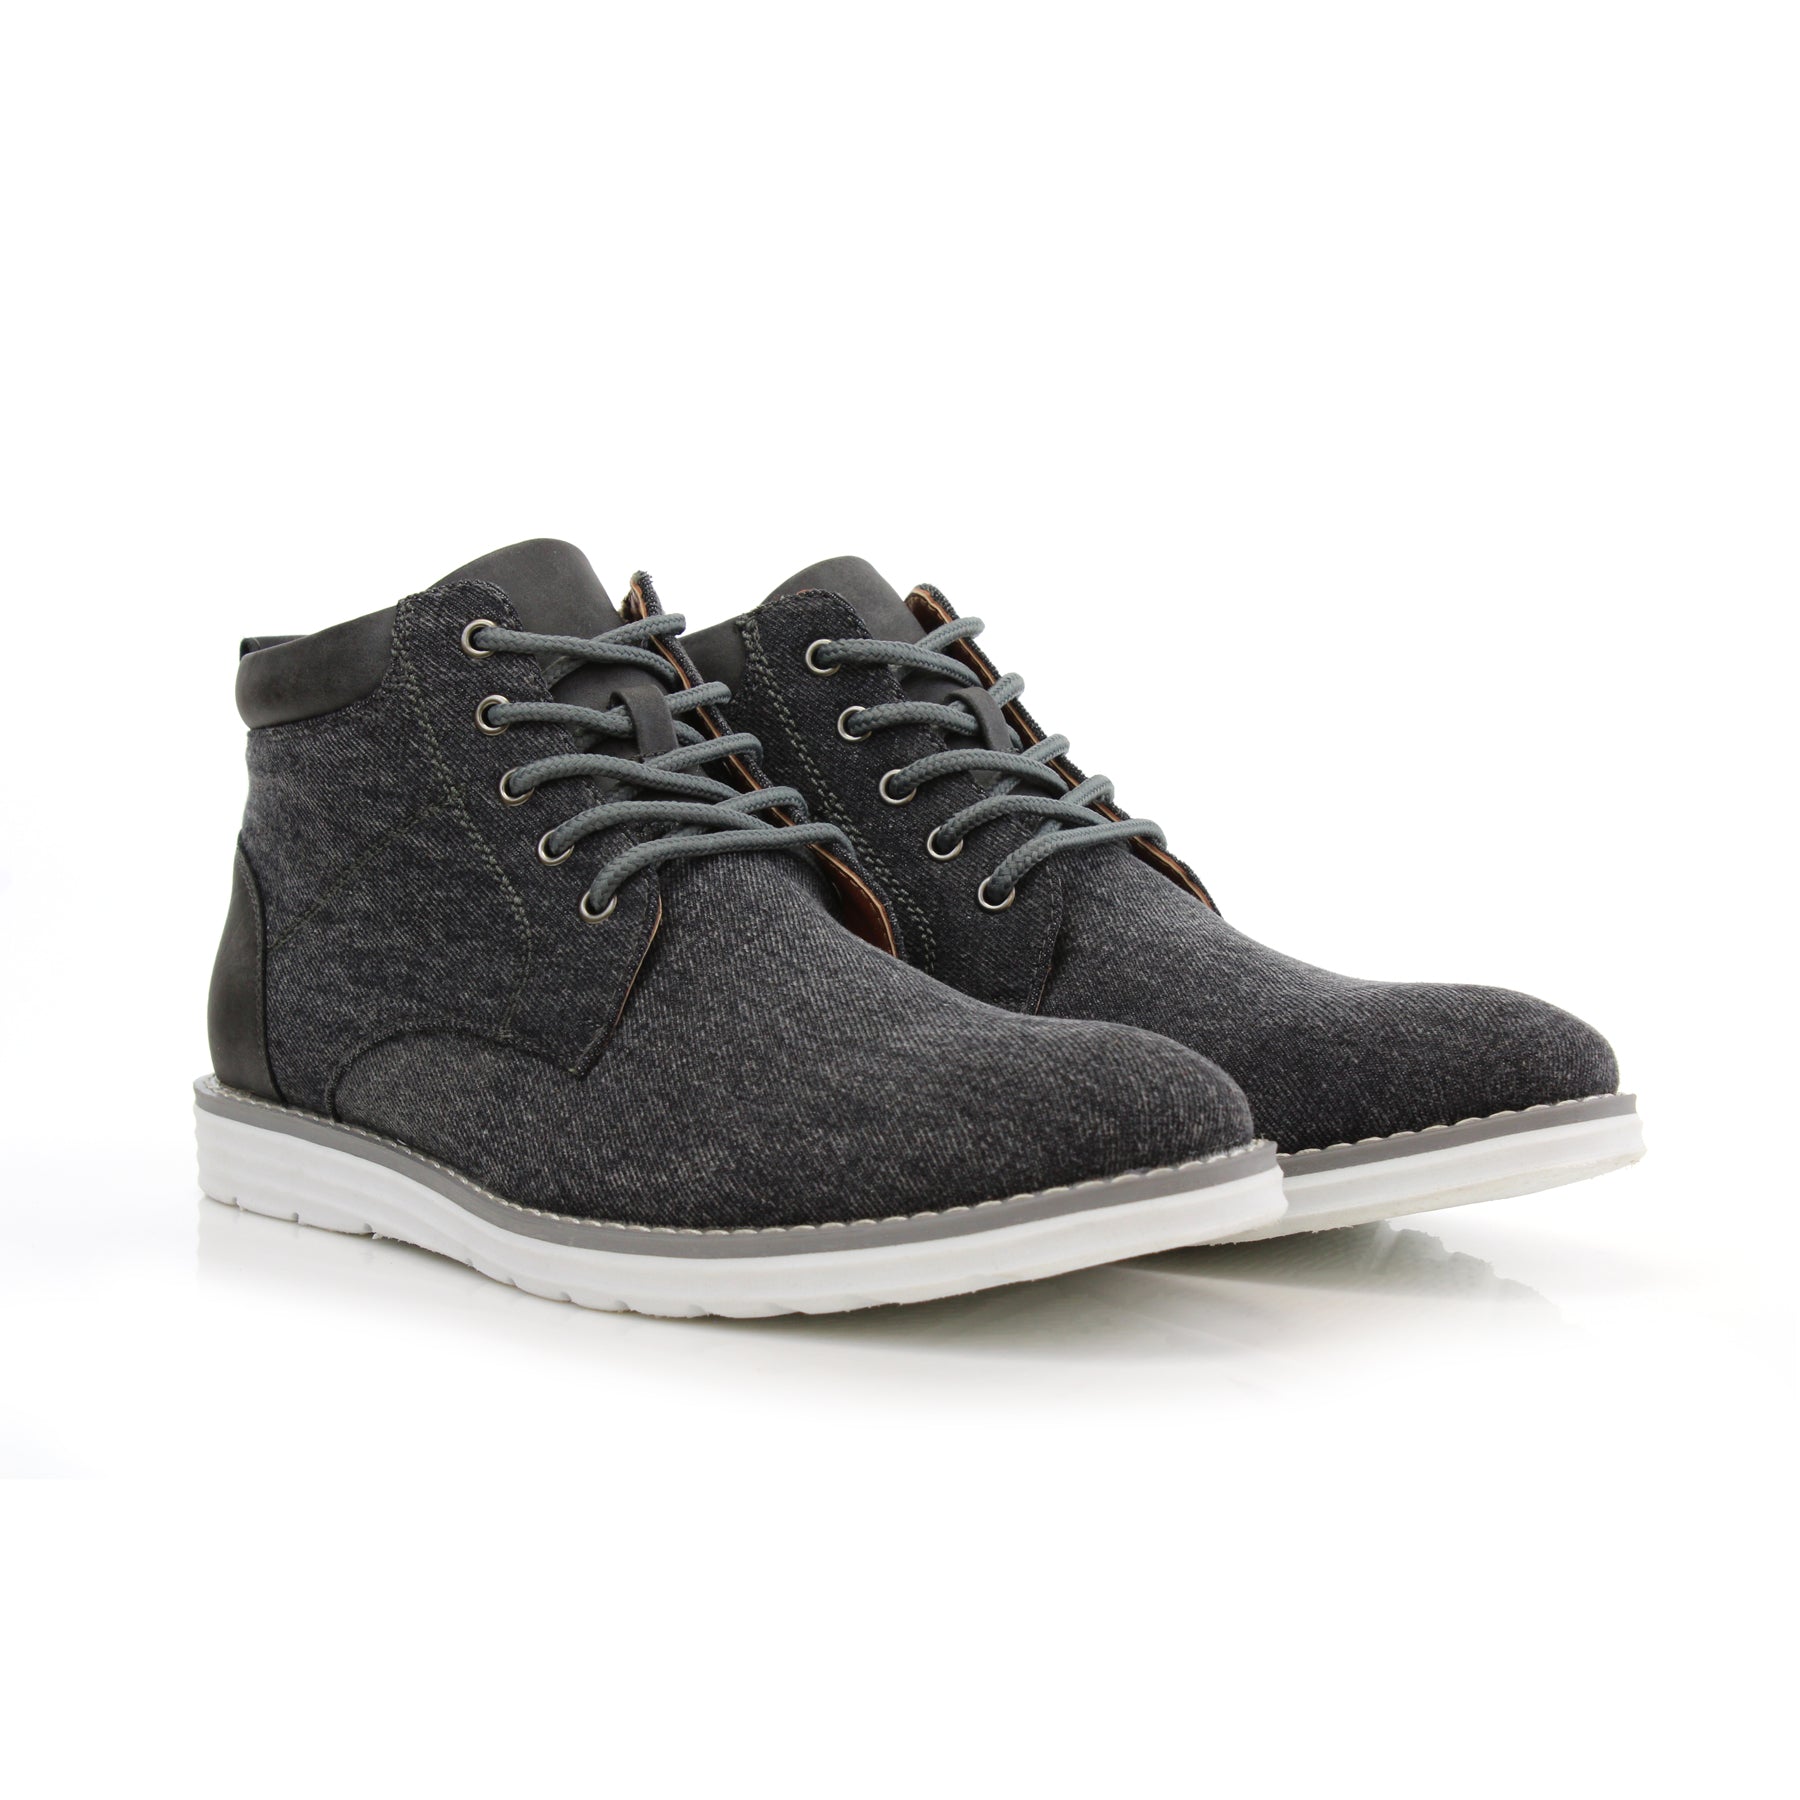 Denim Chukka Sneakers | Dustin by Polar Fox | Conal Footwear | Paired Angle View